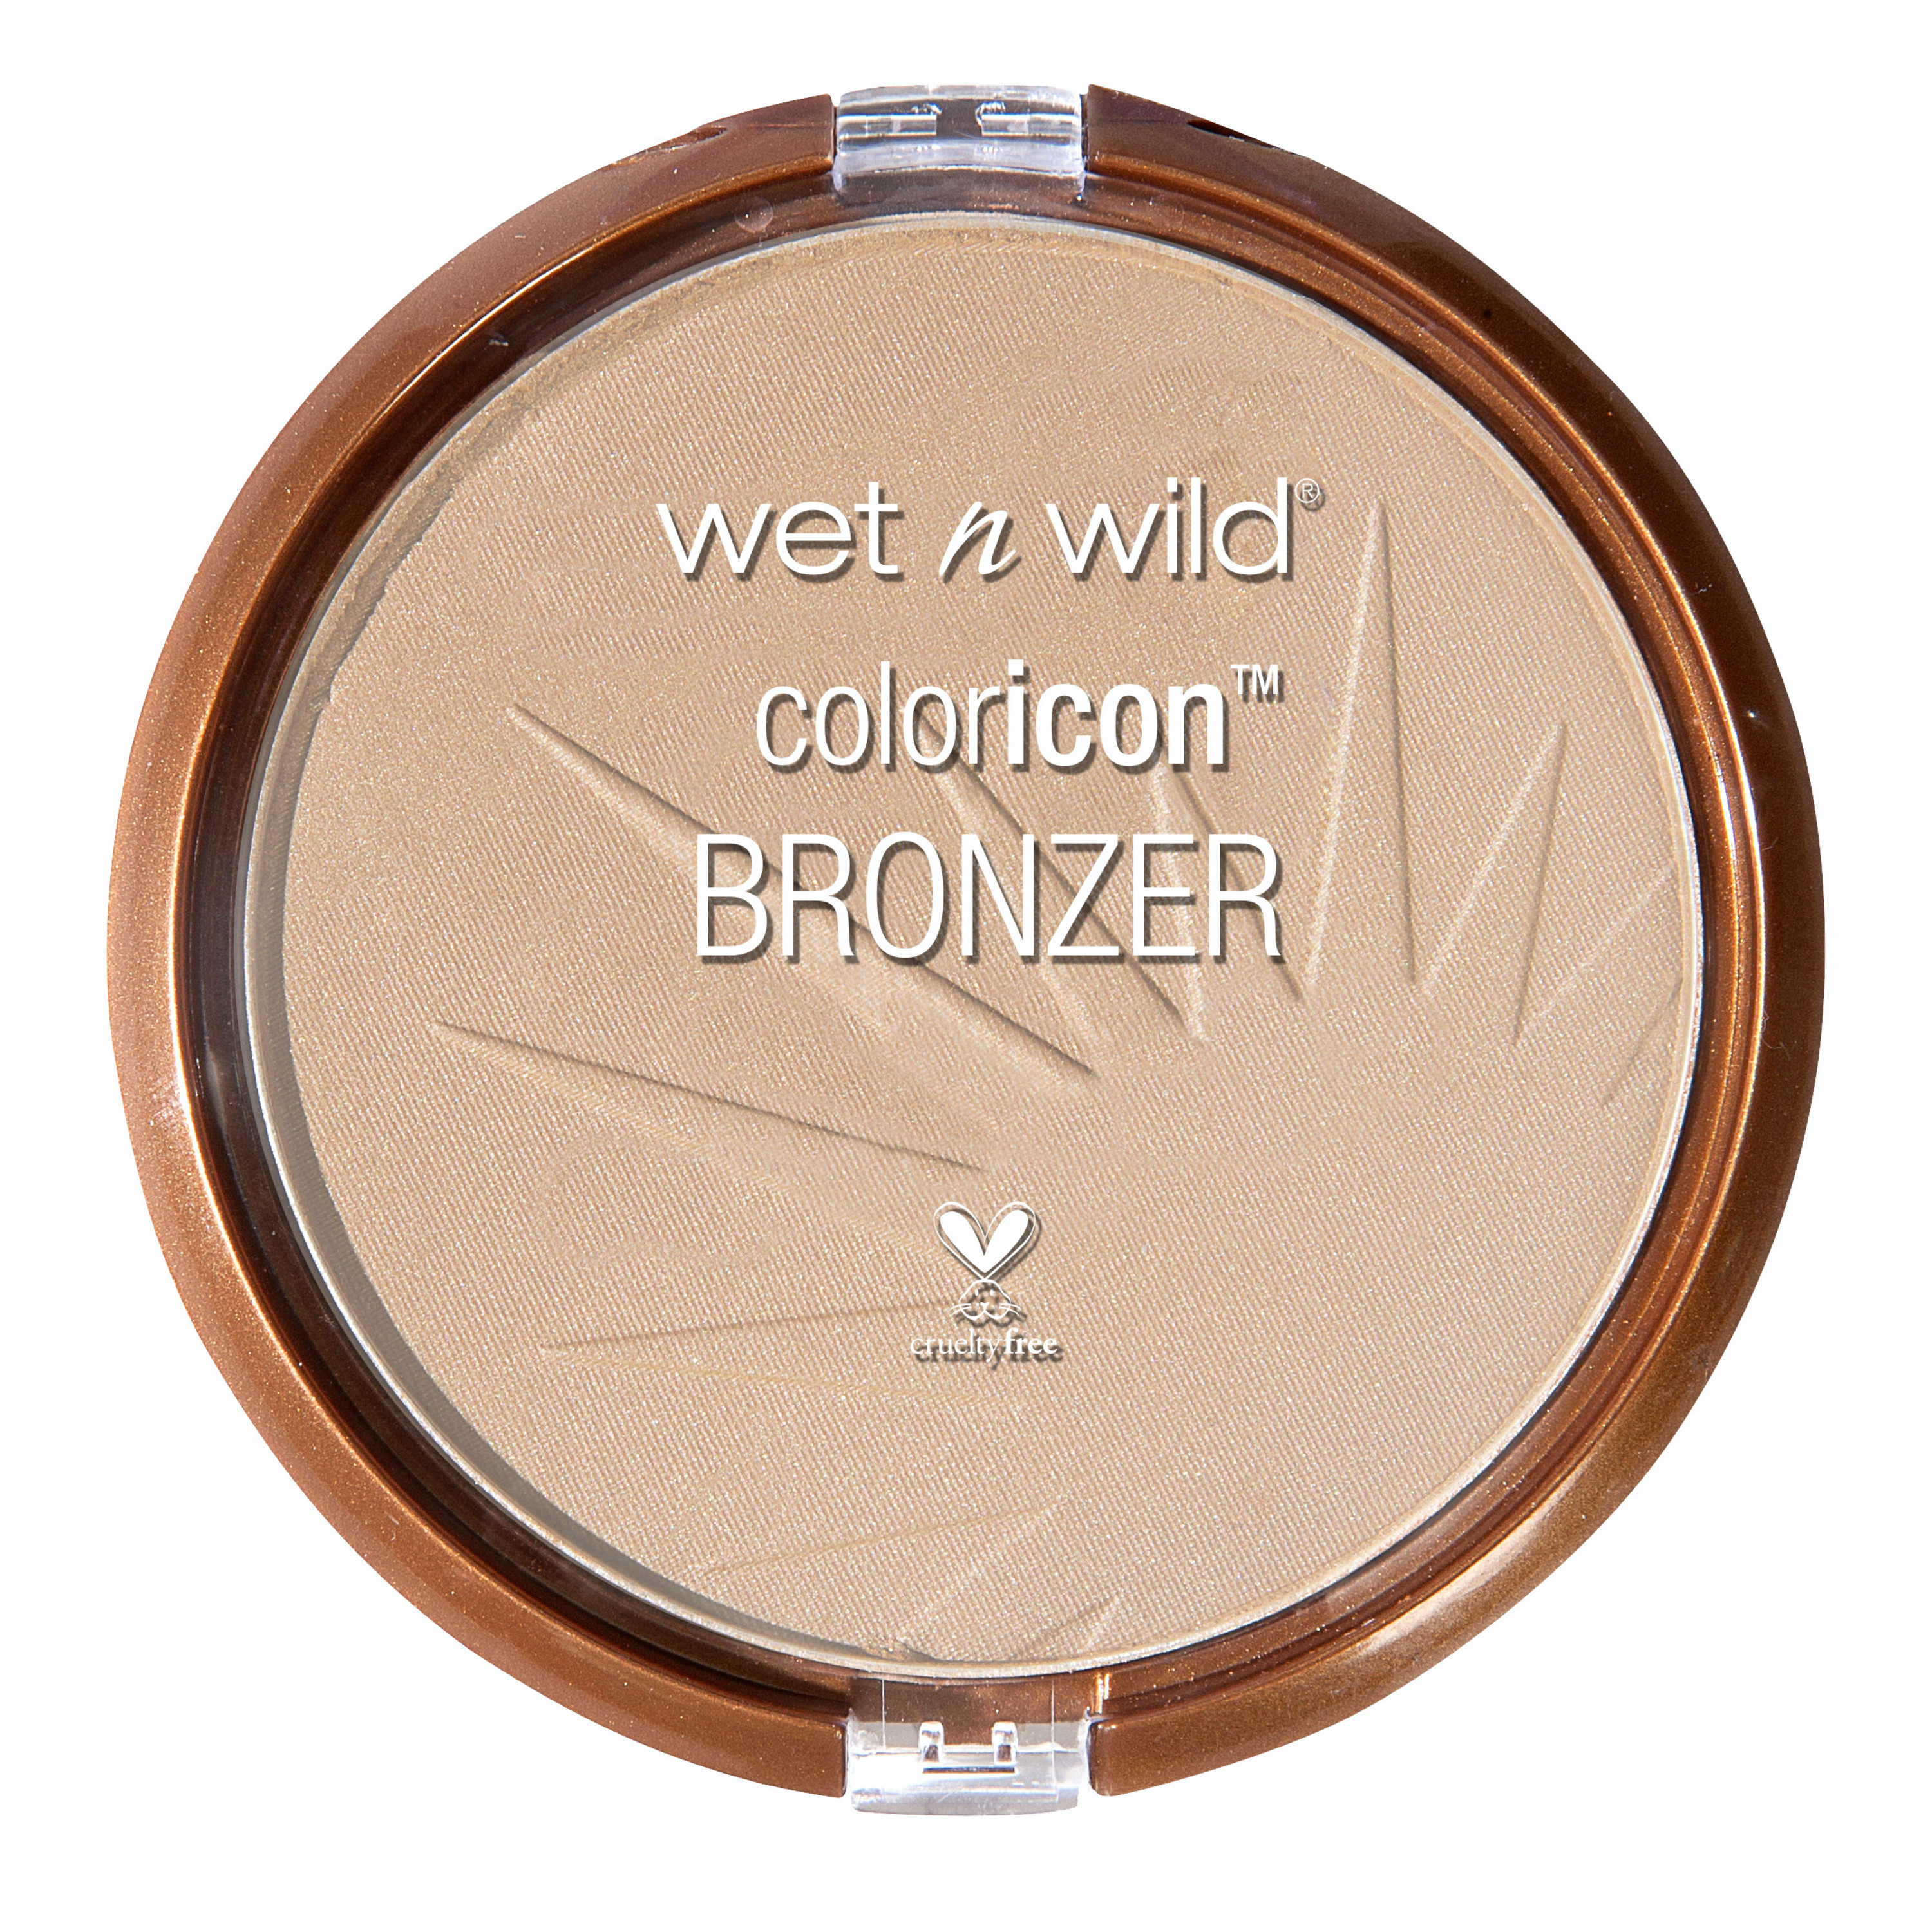 wet n wild Color Icon Bronzer, Reserve Your Cabana - image 1 of 2